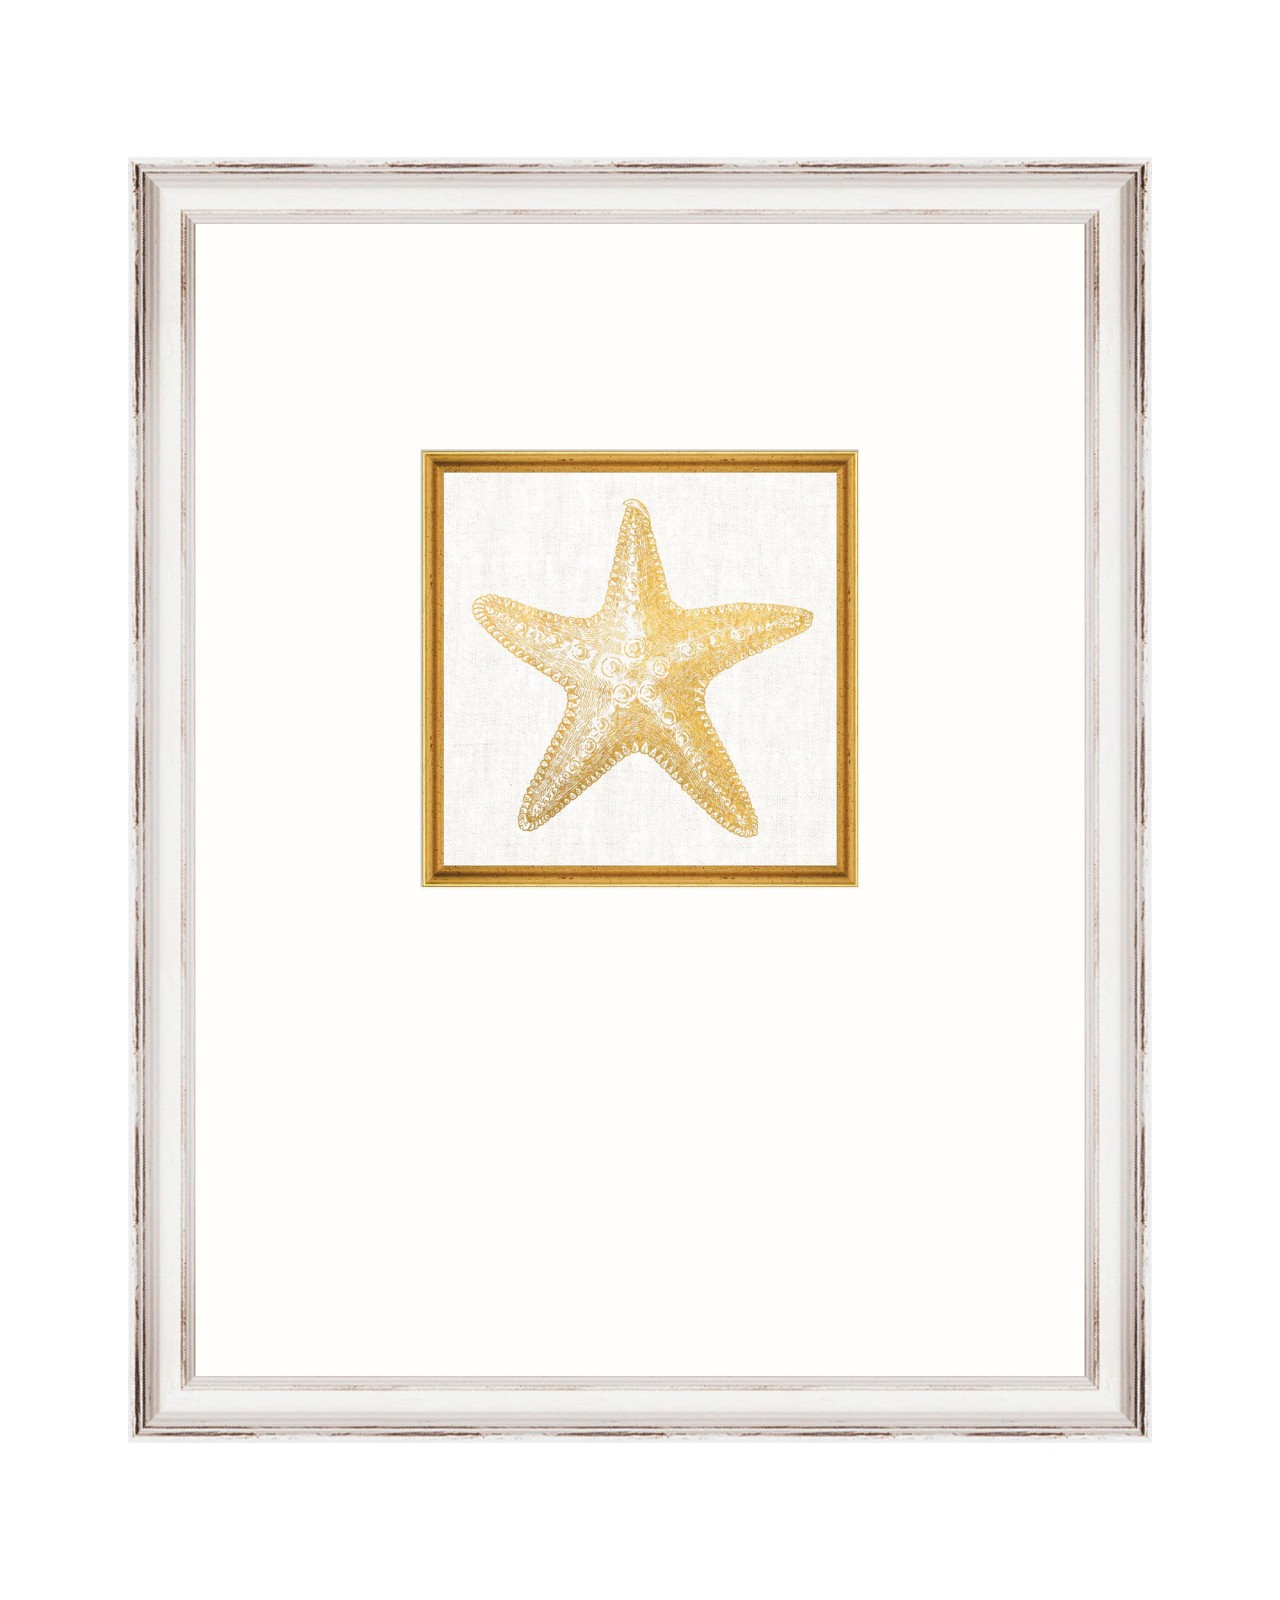 images/productimages/small/framed-linen-starfish-framed-art-35x45cm-fa13289.jpg